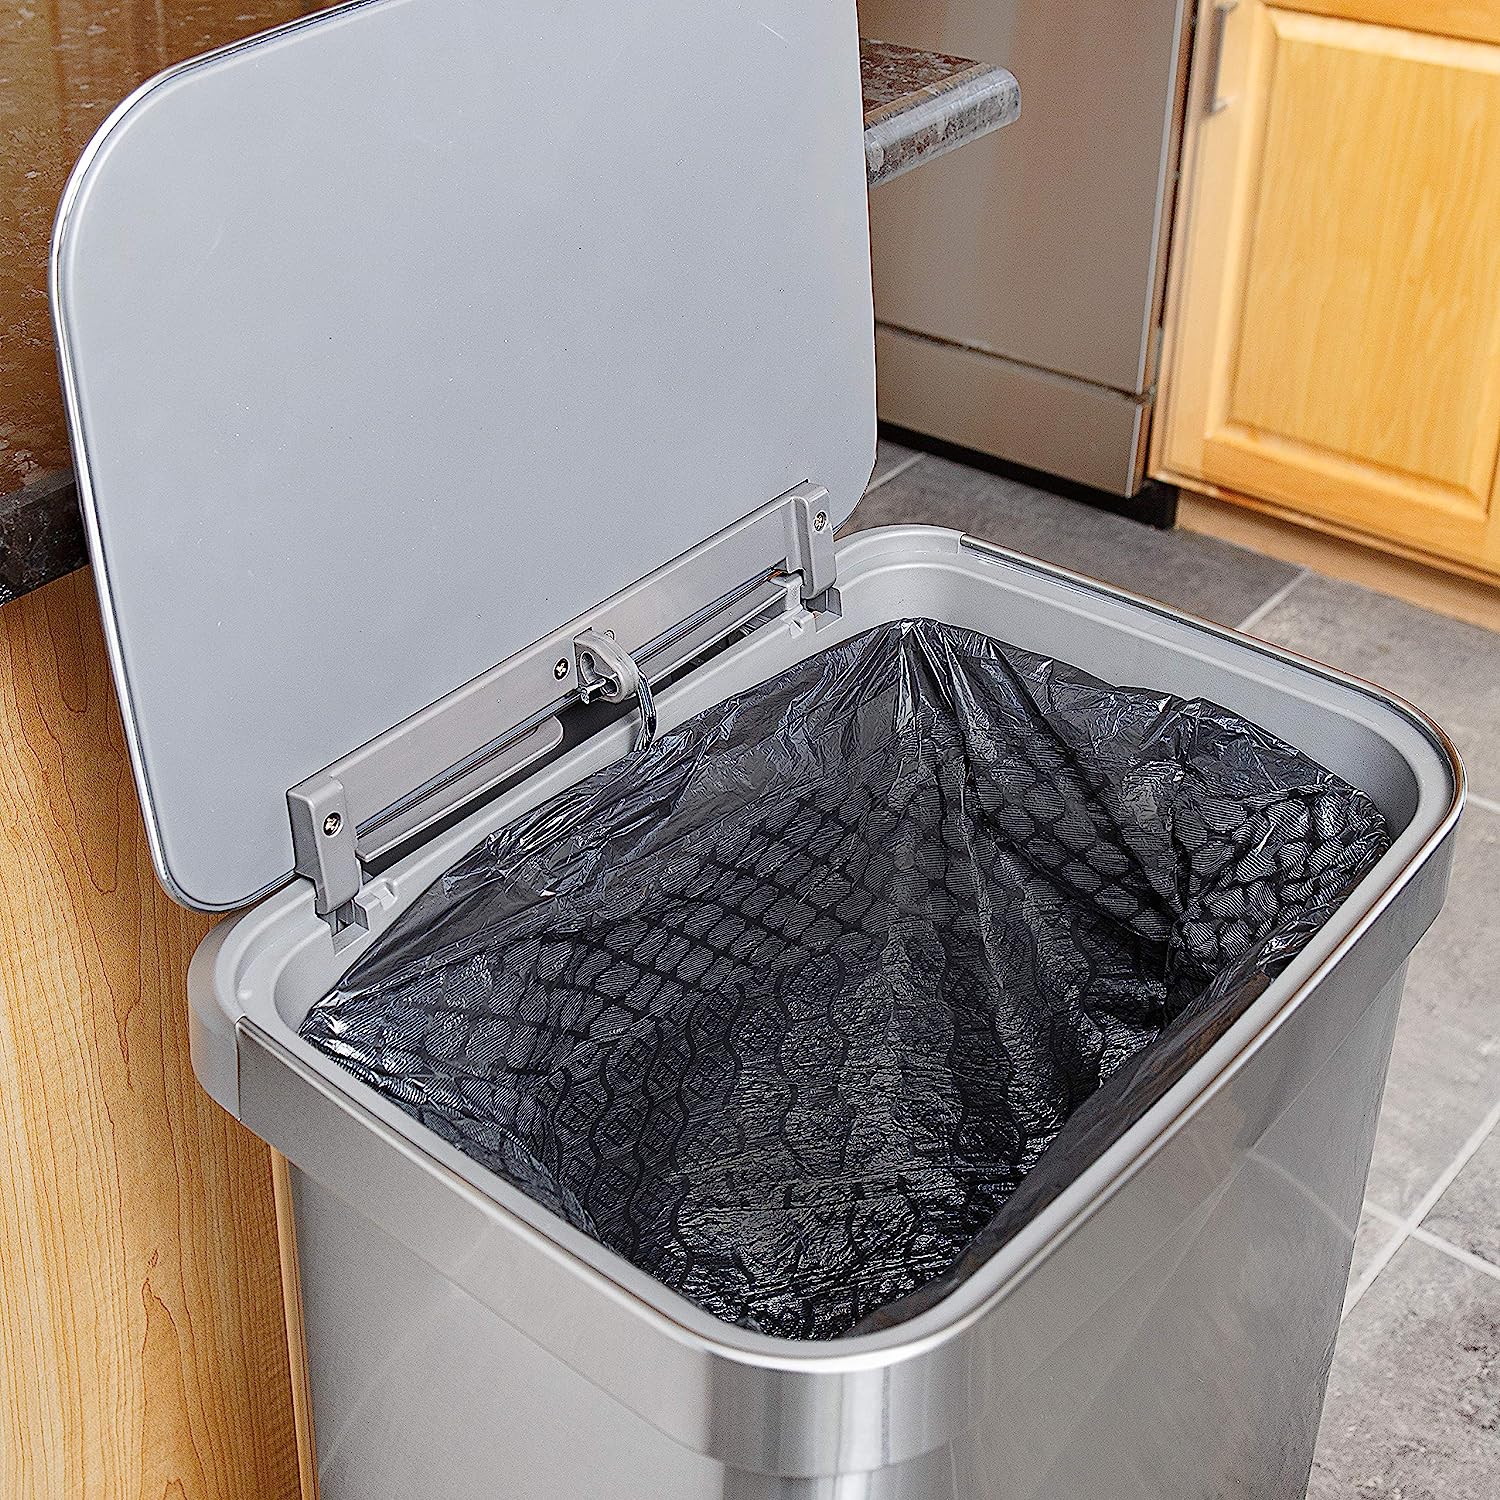 https://bigbigmart.com/wp-content/uploads/2023/07/Glad-Stainless-Steel-Step-Trash-Can-with-Clorox-Odor-Protection-Large-Metal-Kitchen-Garbage-Bin-with-Soft-Close-Lid-Foot-Pedal-and-Waste-Bag-Roll-Holder-20-Gallon-All-Stainless3.jpg